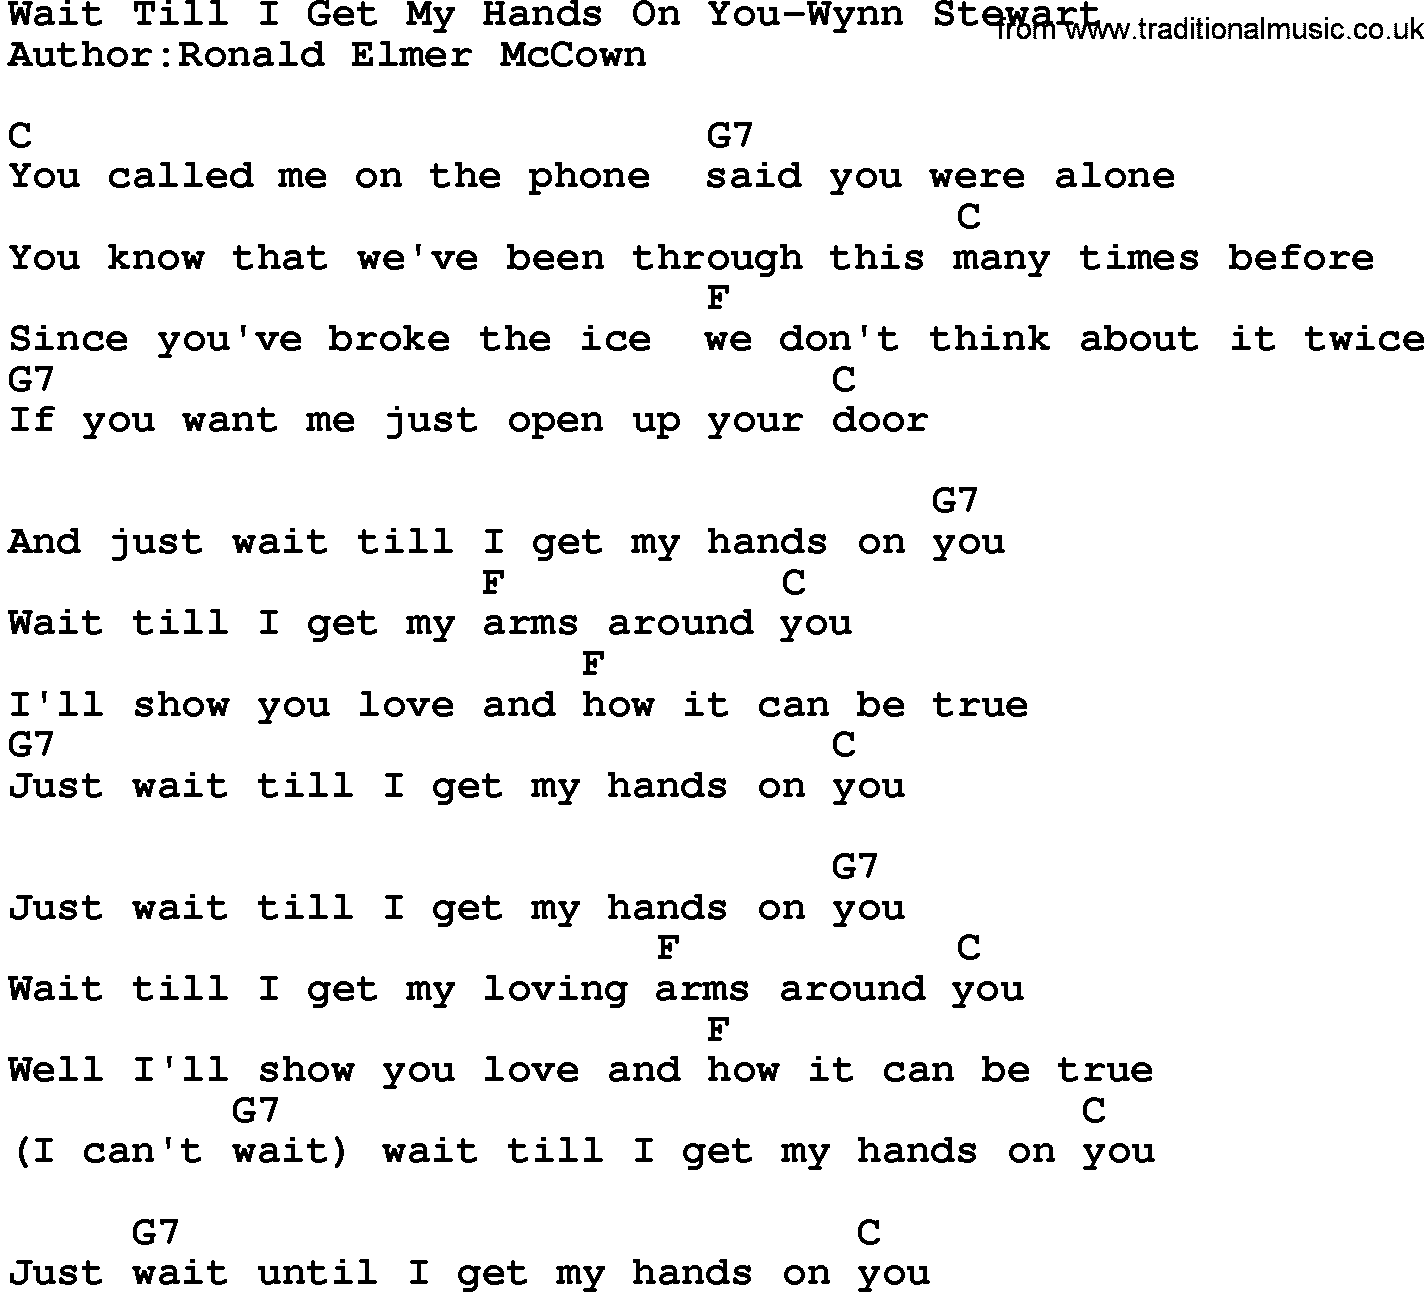 Country music song: Wait Till I Get My Hands On You-Wynn Stewart lyrics and chords